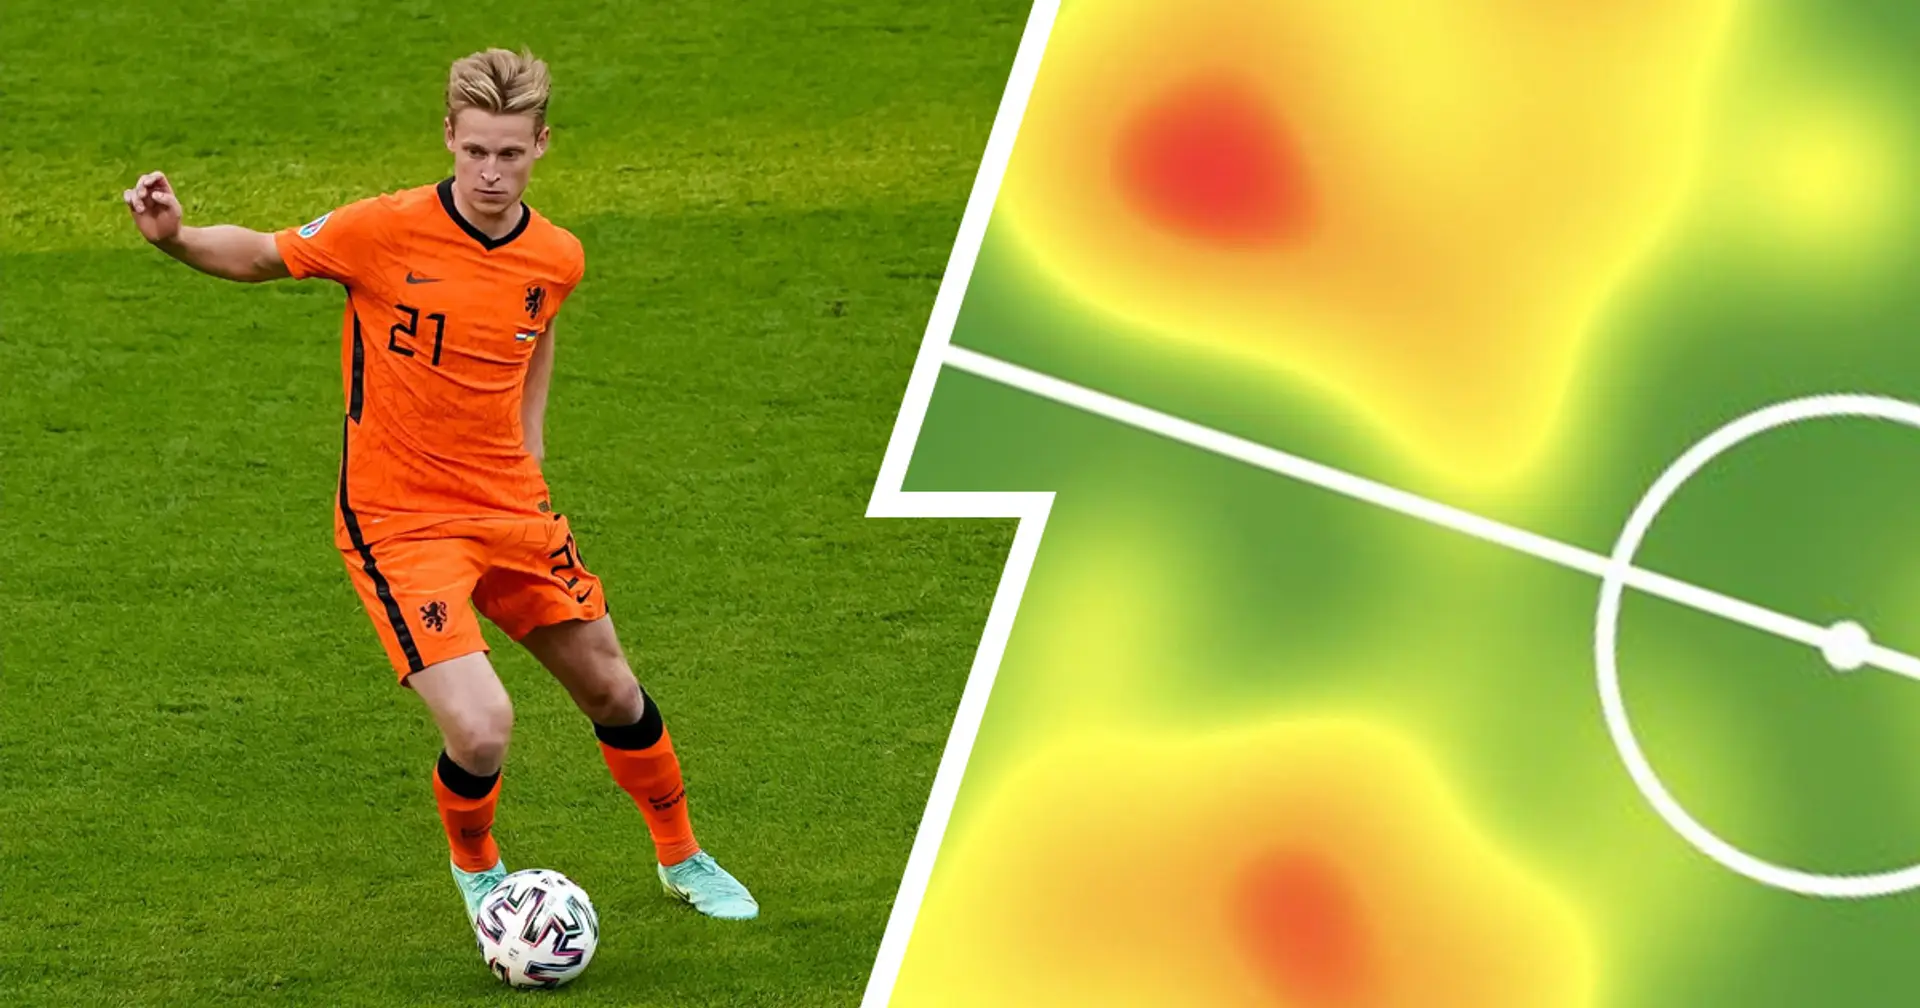 Frenkie de Jong bosses midfield again as Netherlands win their Euro 2020 group after just 2 games